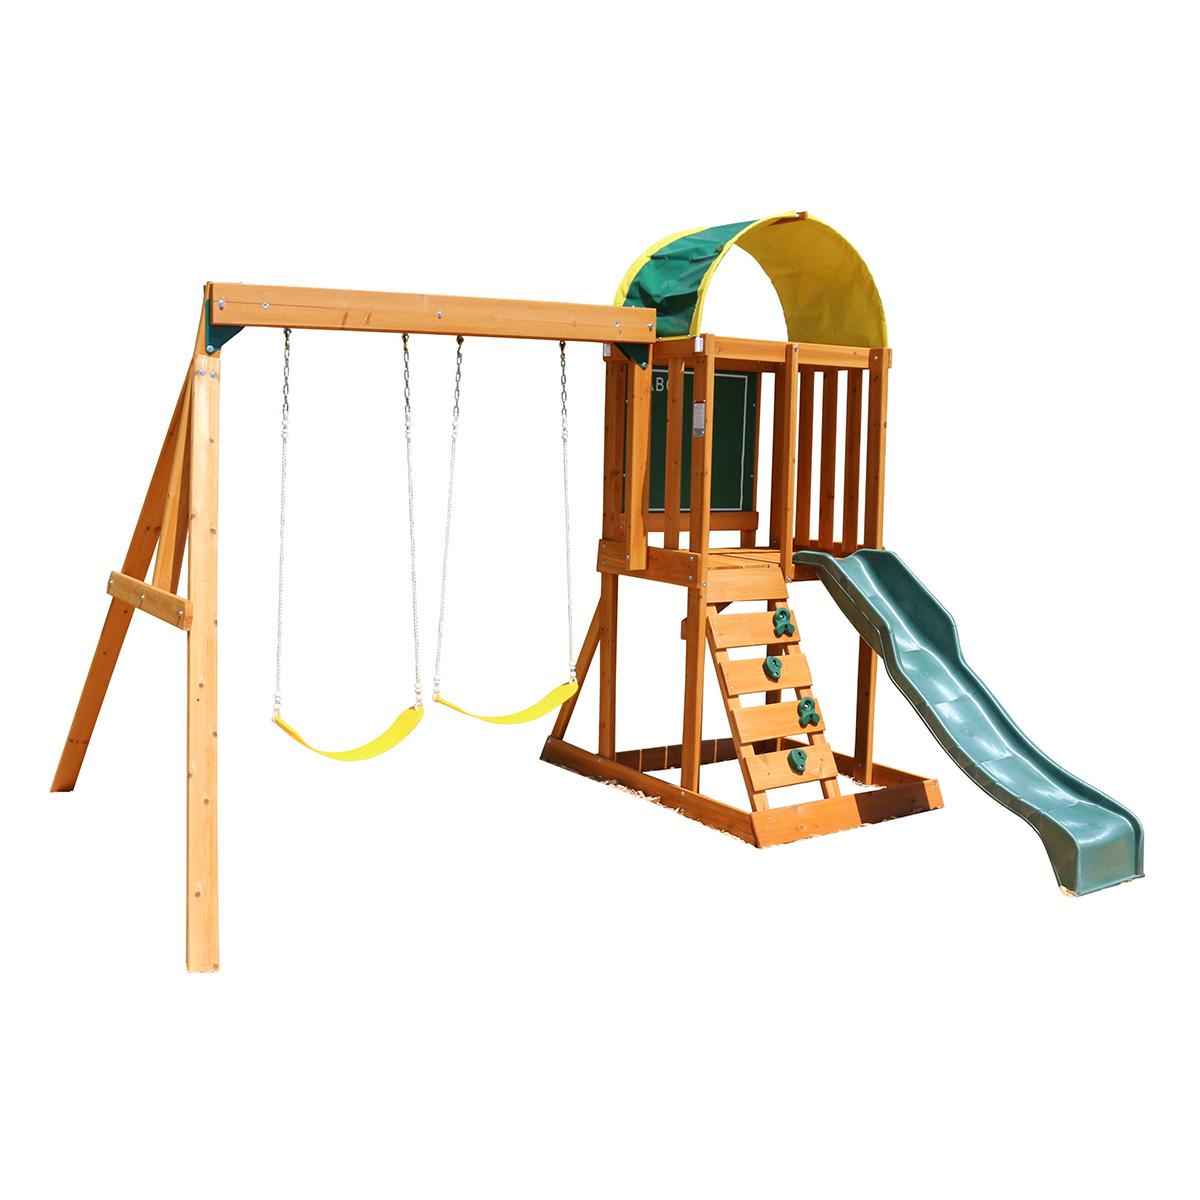 KidKraft Ainsley Wooden Swing Set Playset for $264 Shipped